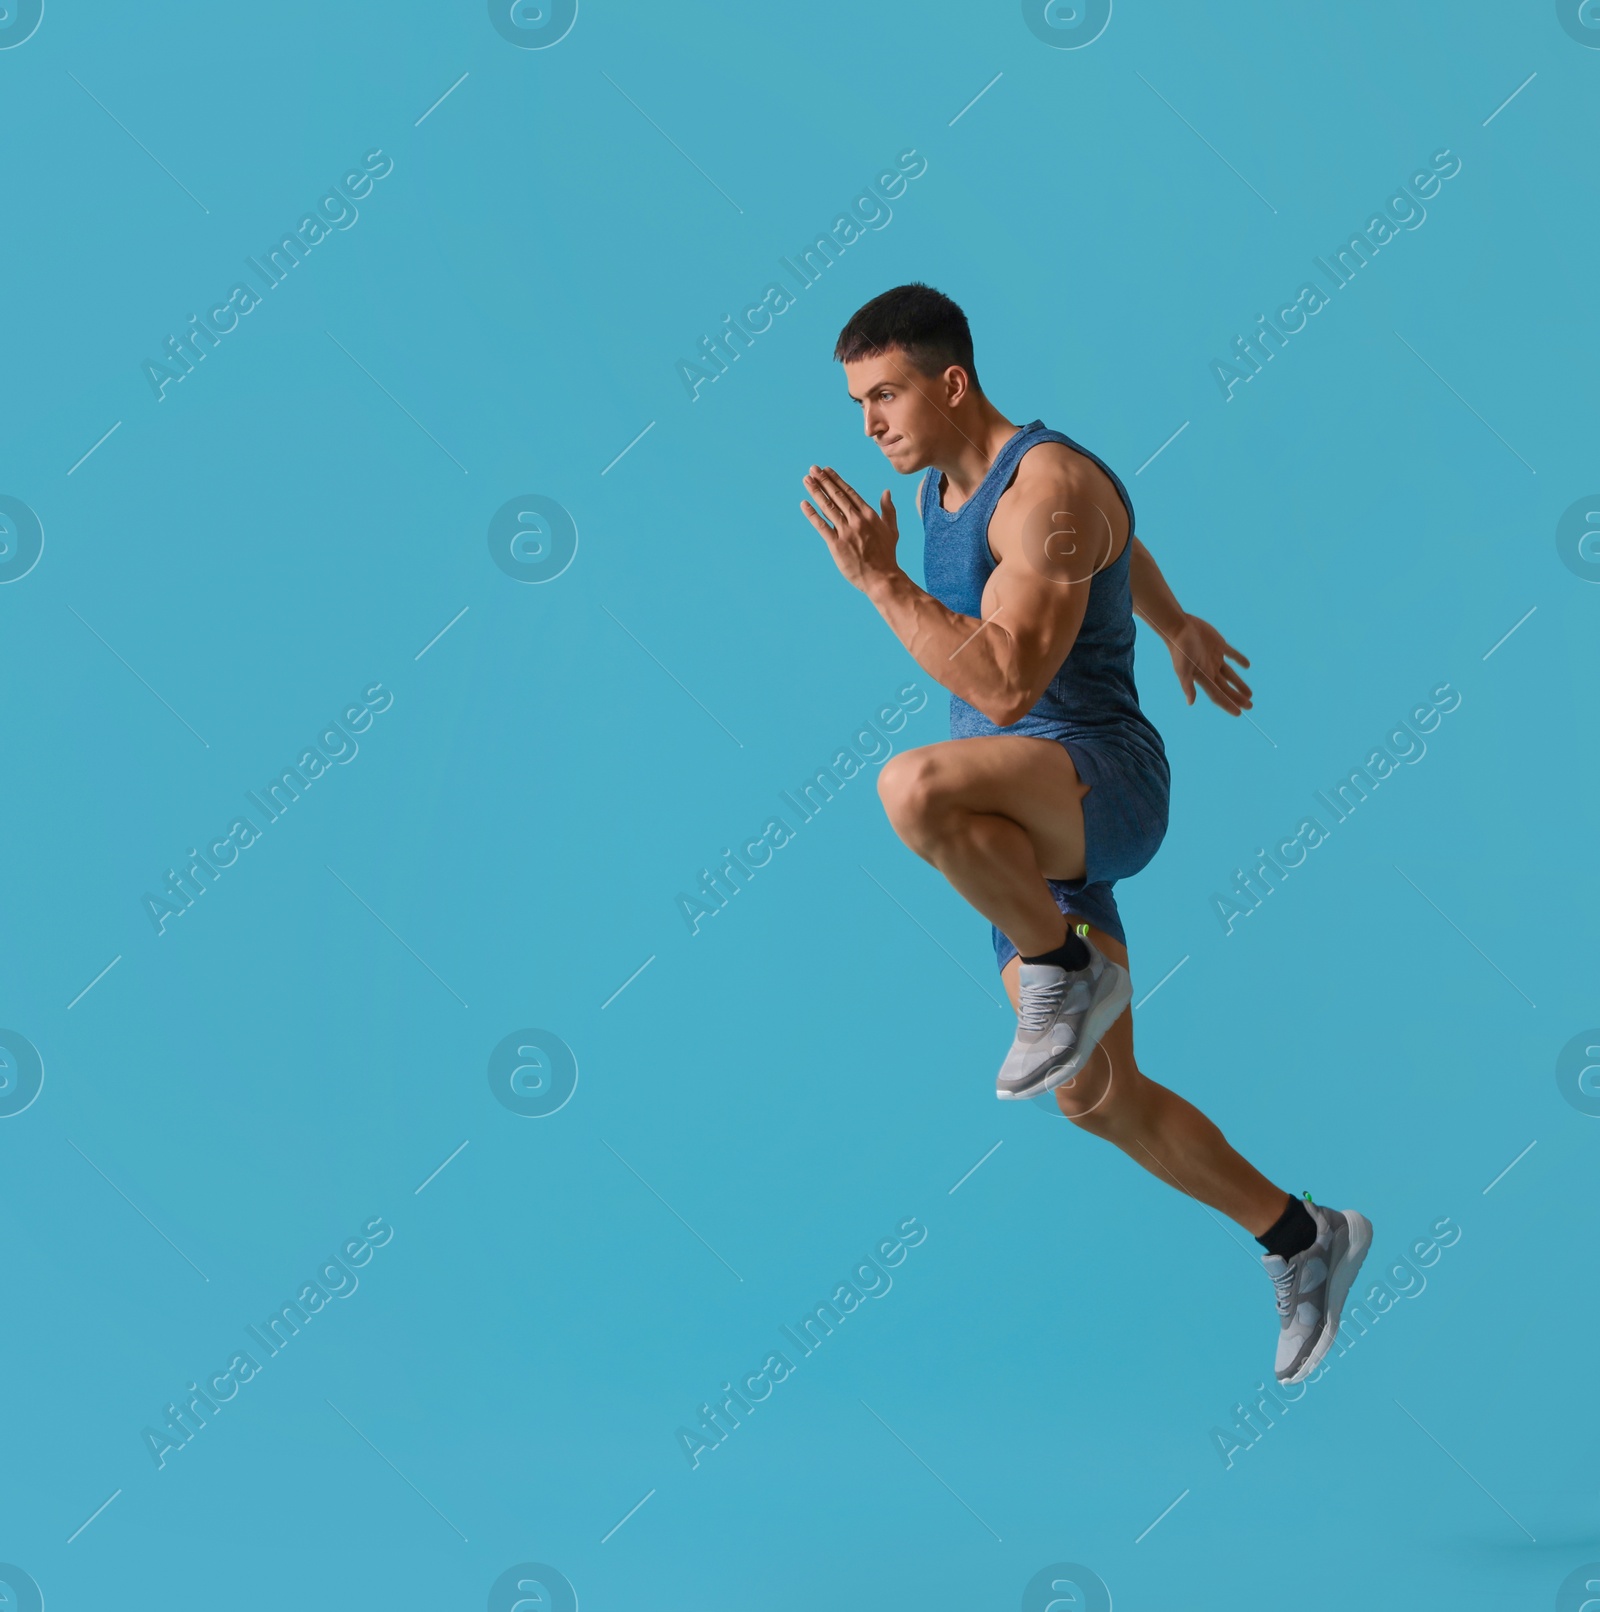 Photo of Athletic young man running on turquoise background, side view